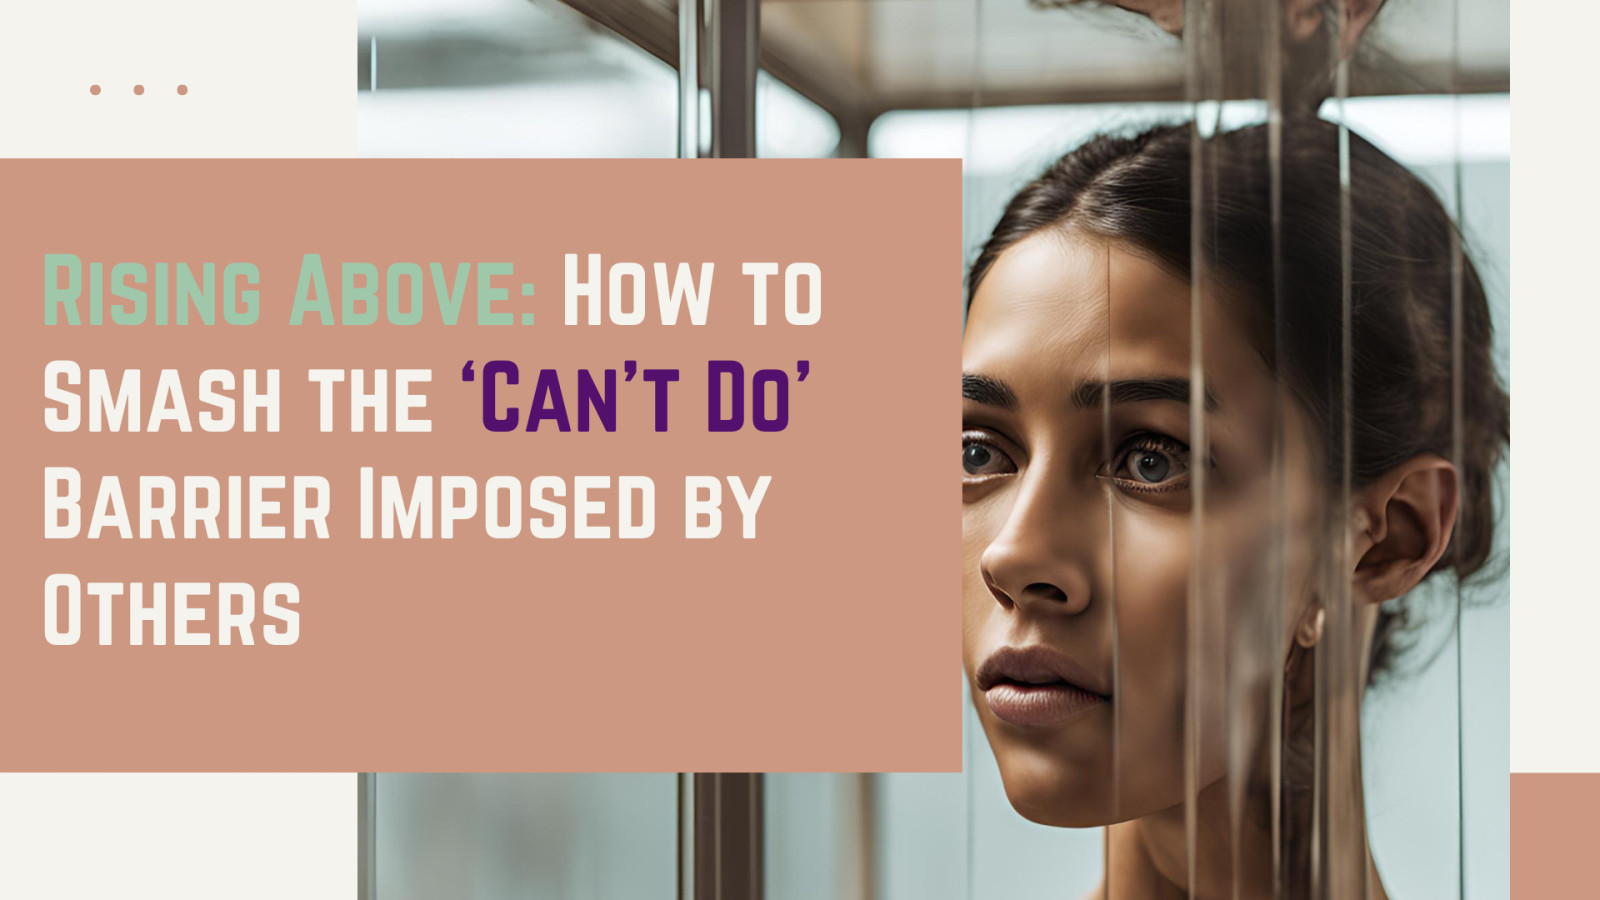 RISING ABOVE: HOW TO SMASH THE ‘CAN’T DO’ BARRIER IMPOSED BY OTHERS